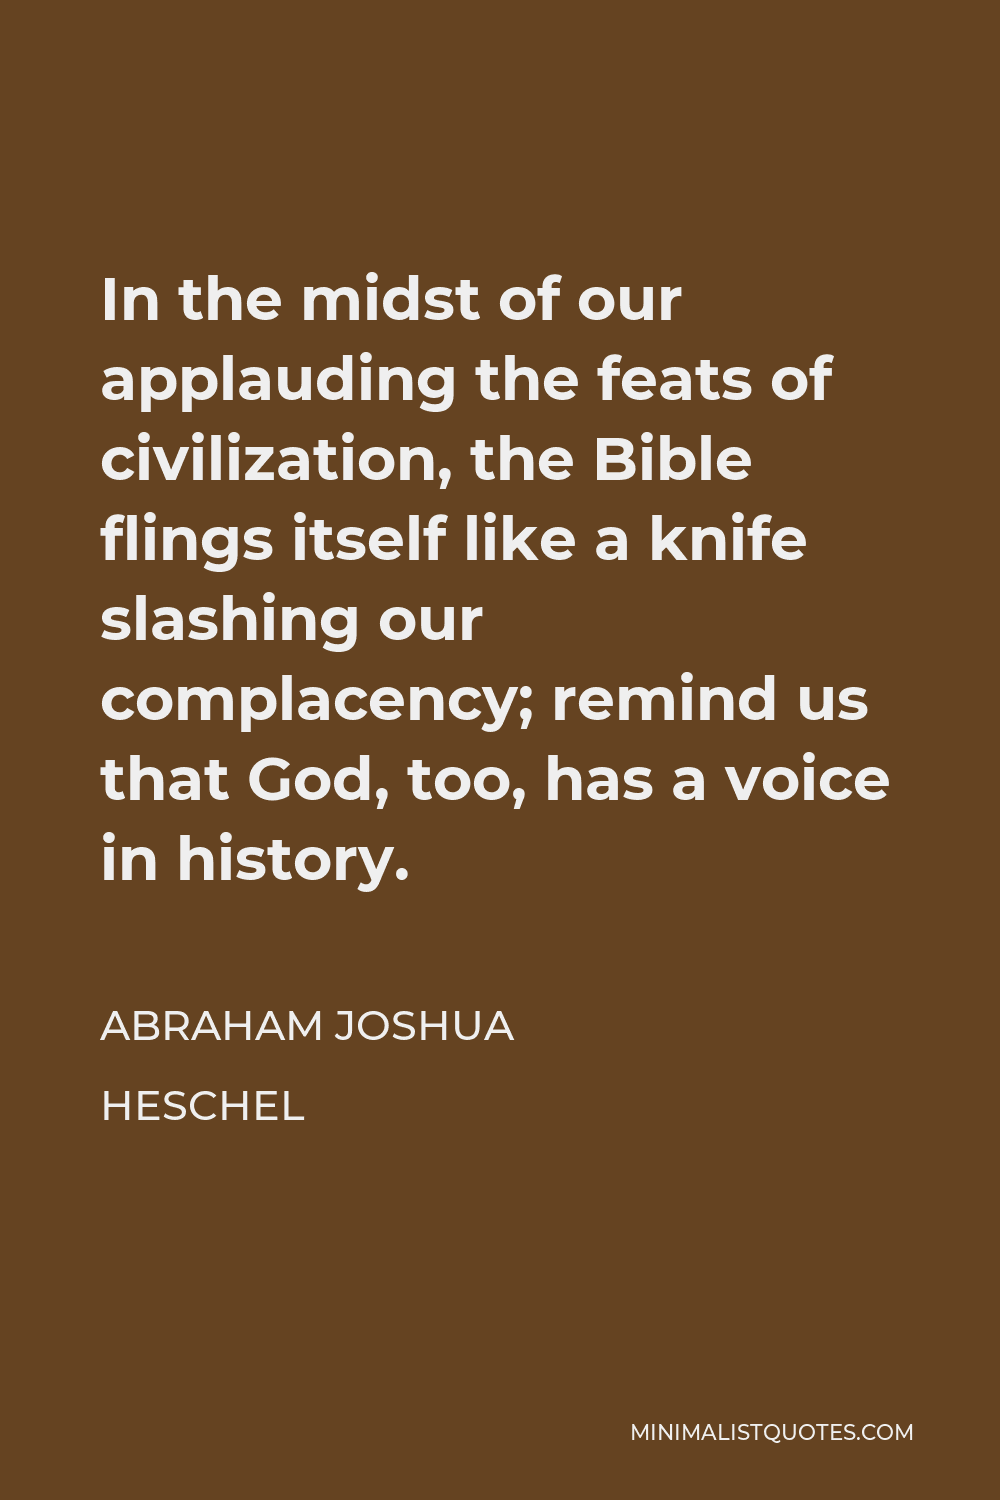 Abraham Joshua Heschel Quote - In the midst of our applauding the feats of civilization, the Bible flings itself like a knife slashing our complacency; remind us that God, too, has a voice in history.